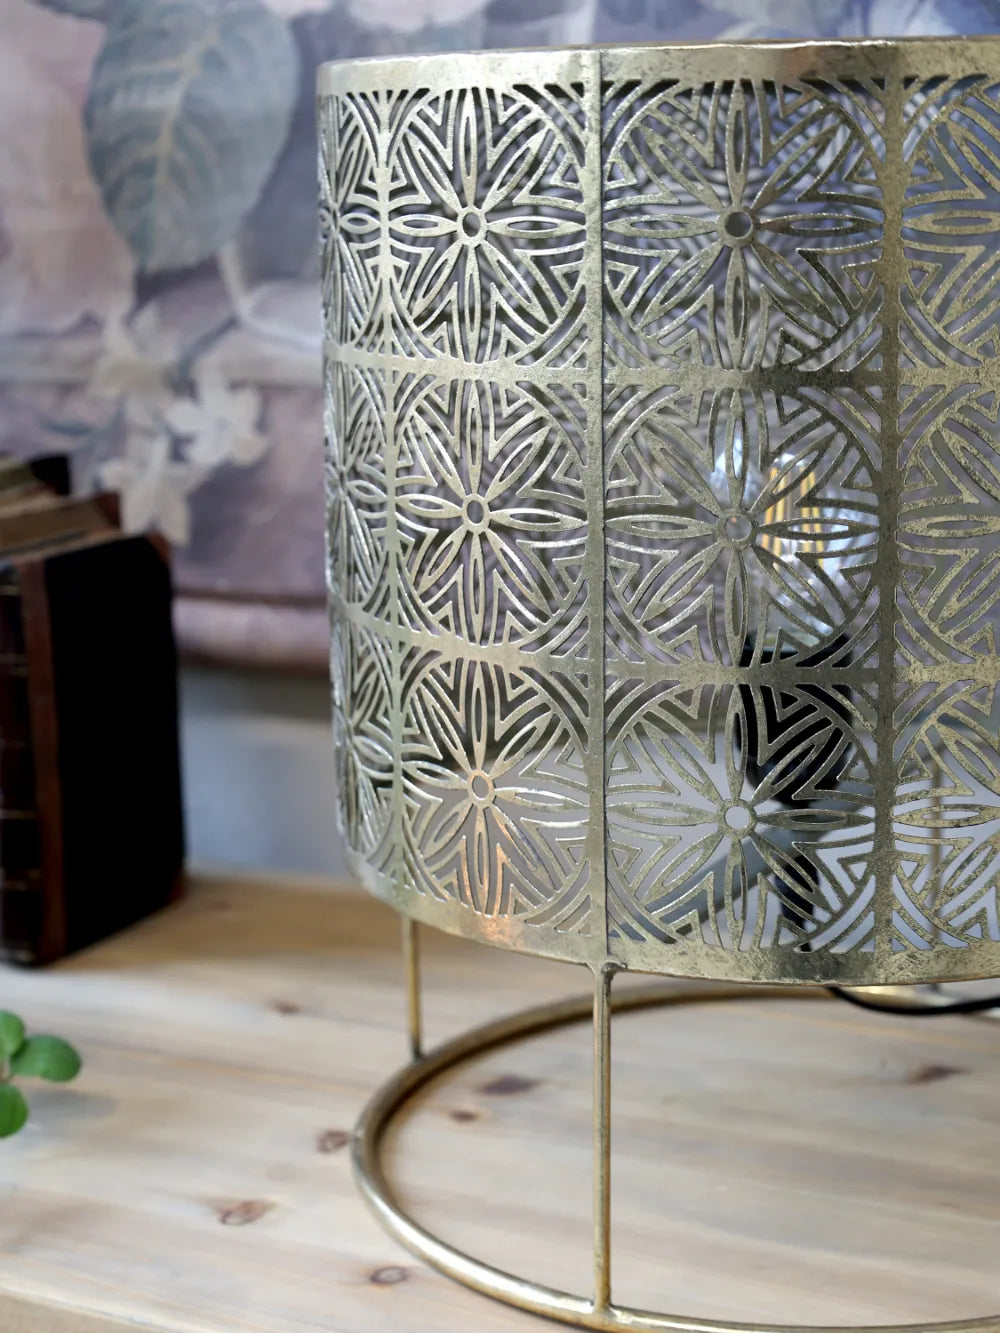 Chic Antique - Lamp with pattern, antique brass